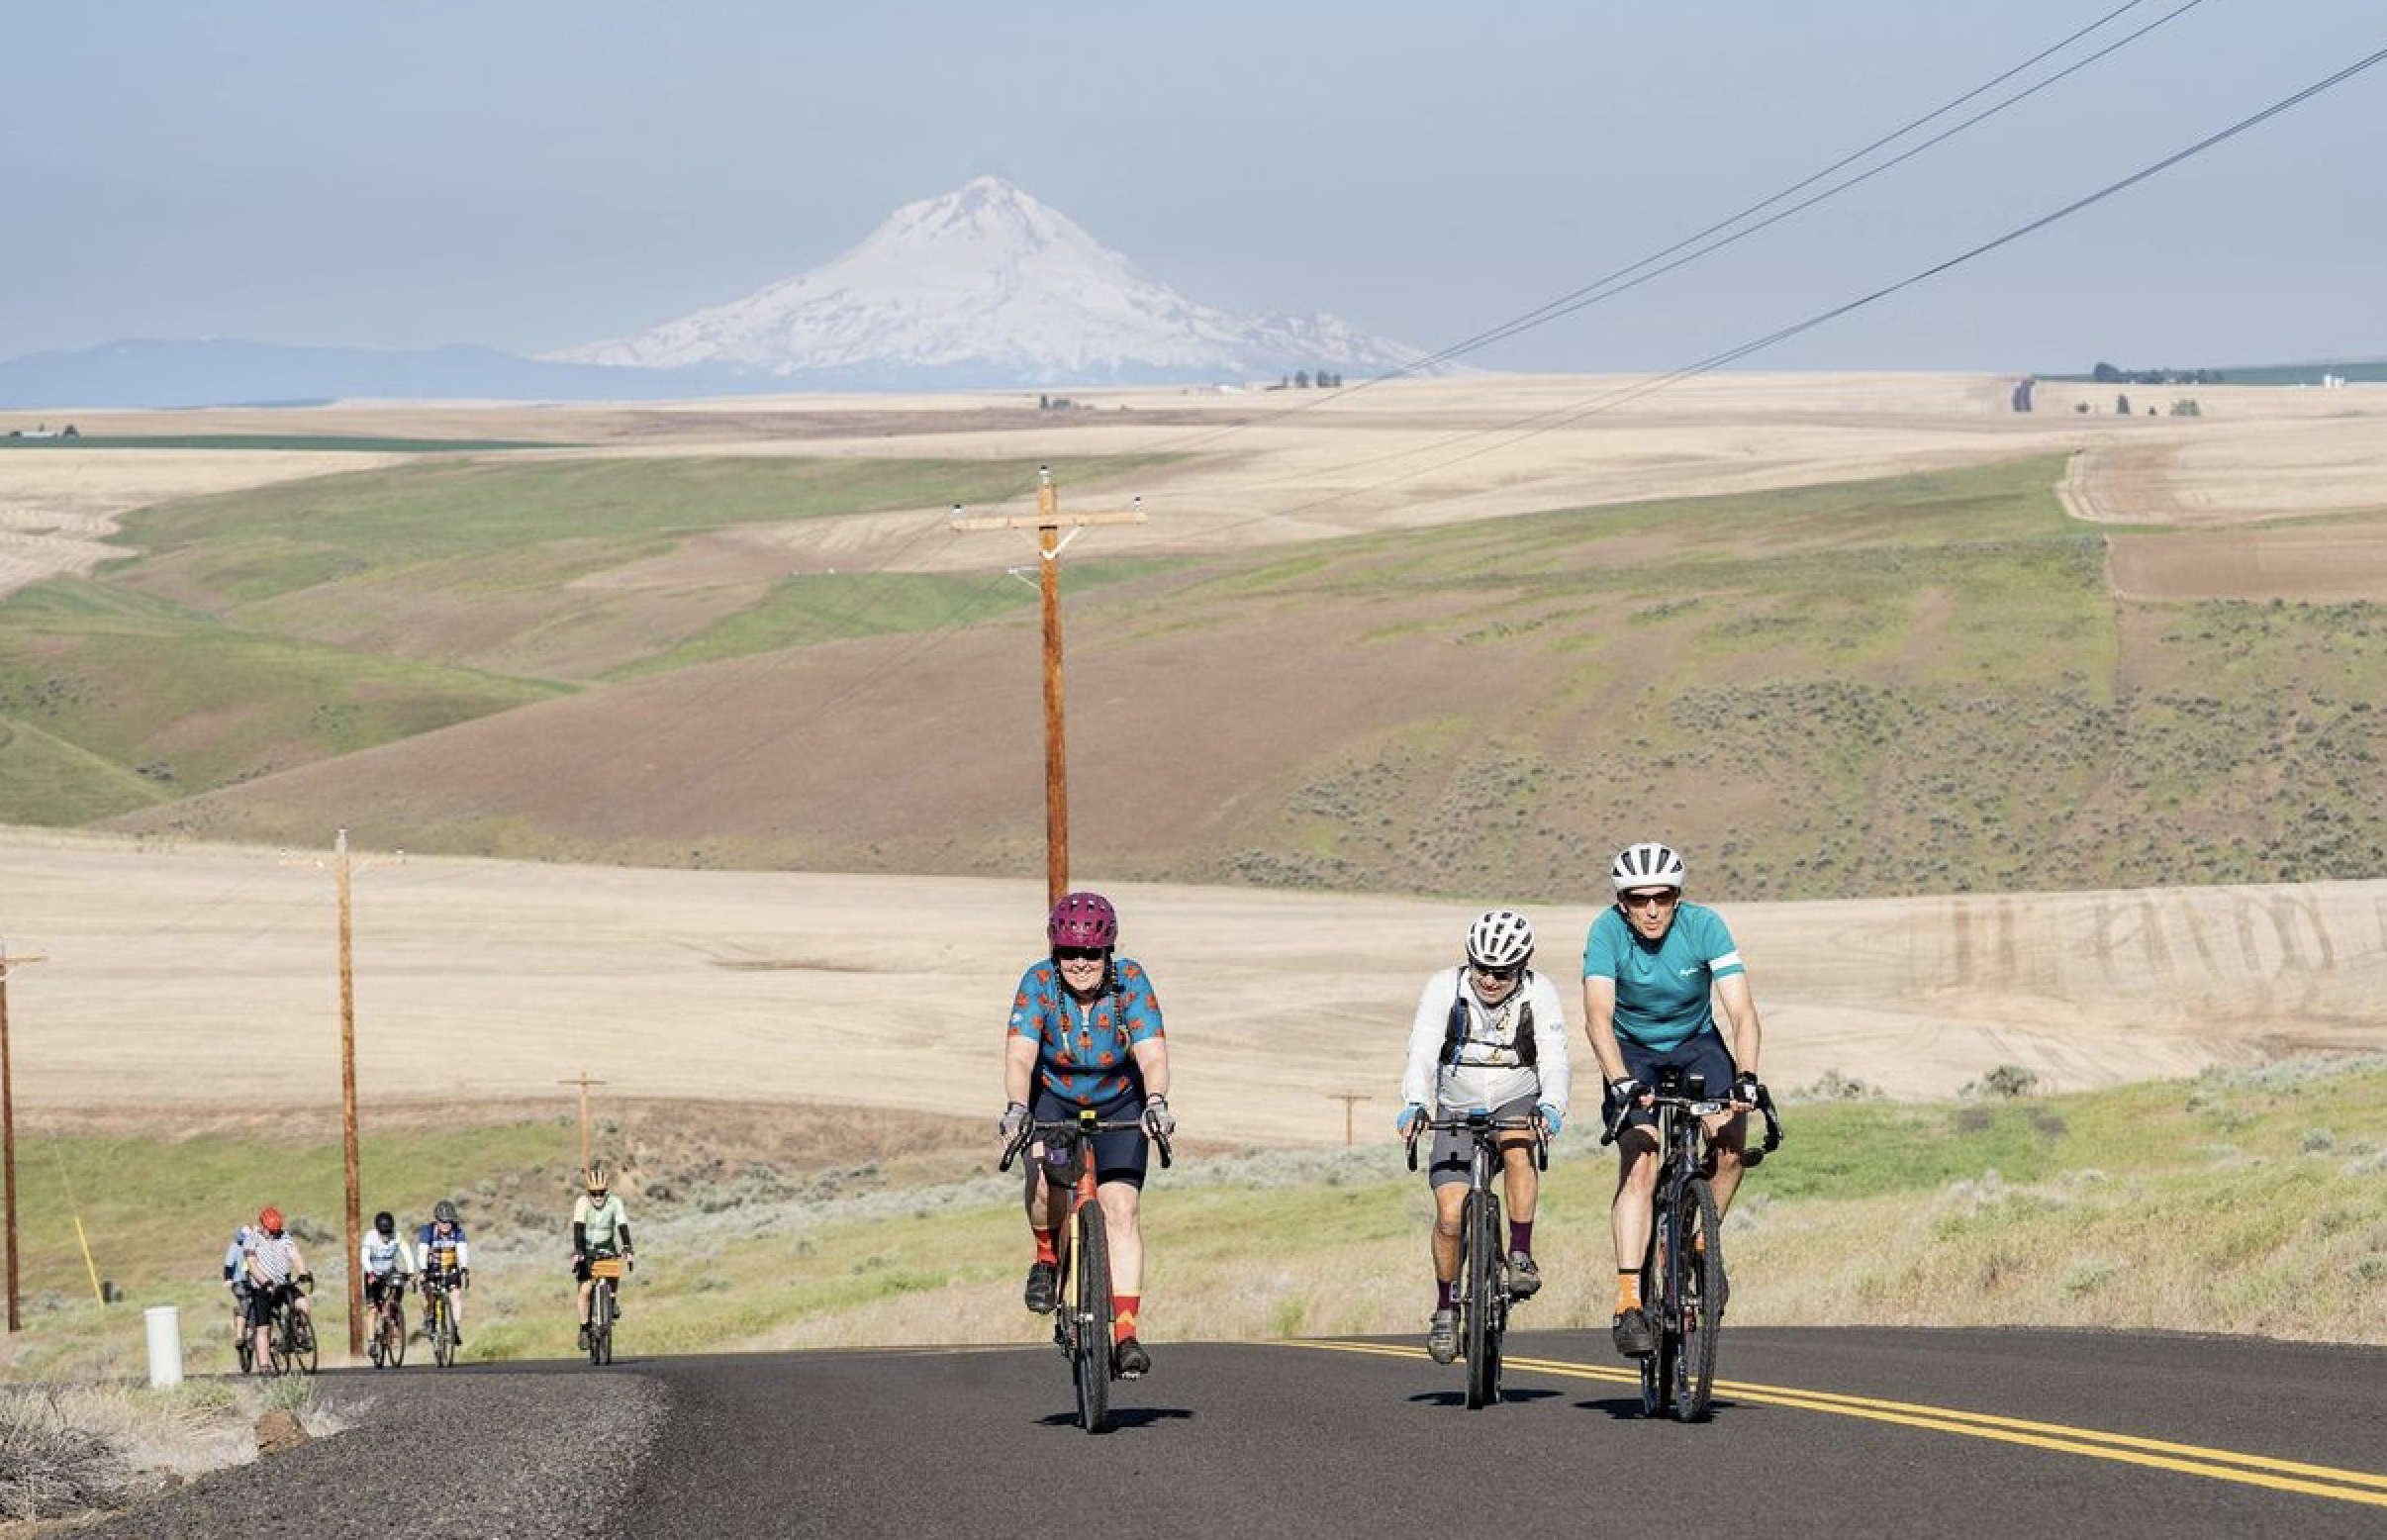 The 33rd and final year of Cycle Oregon's 7day tour will bring